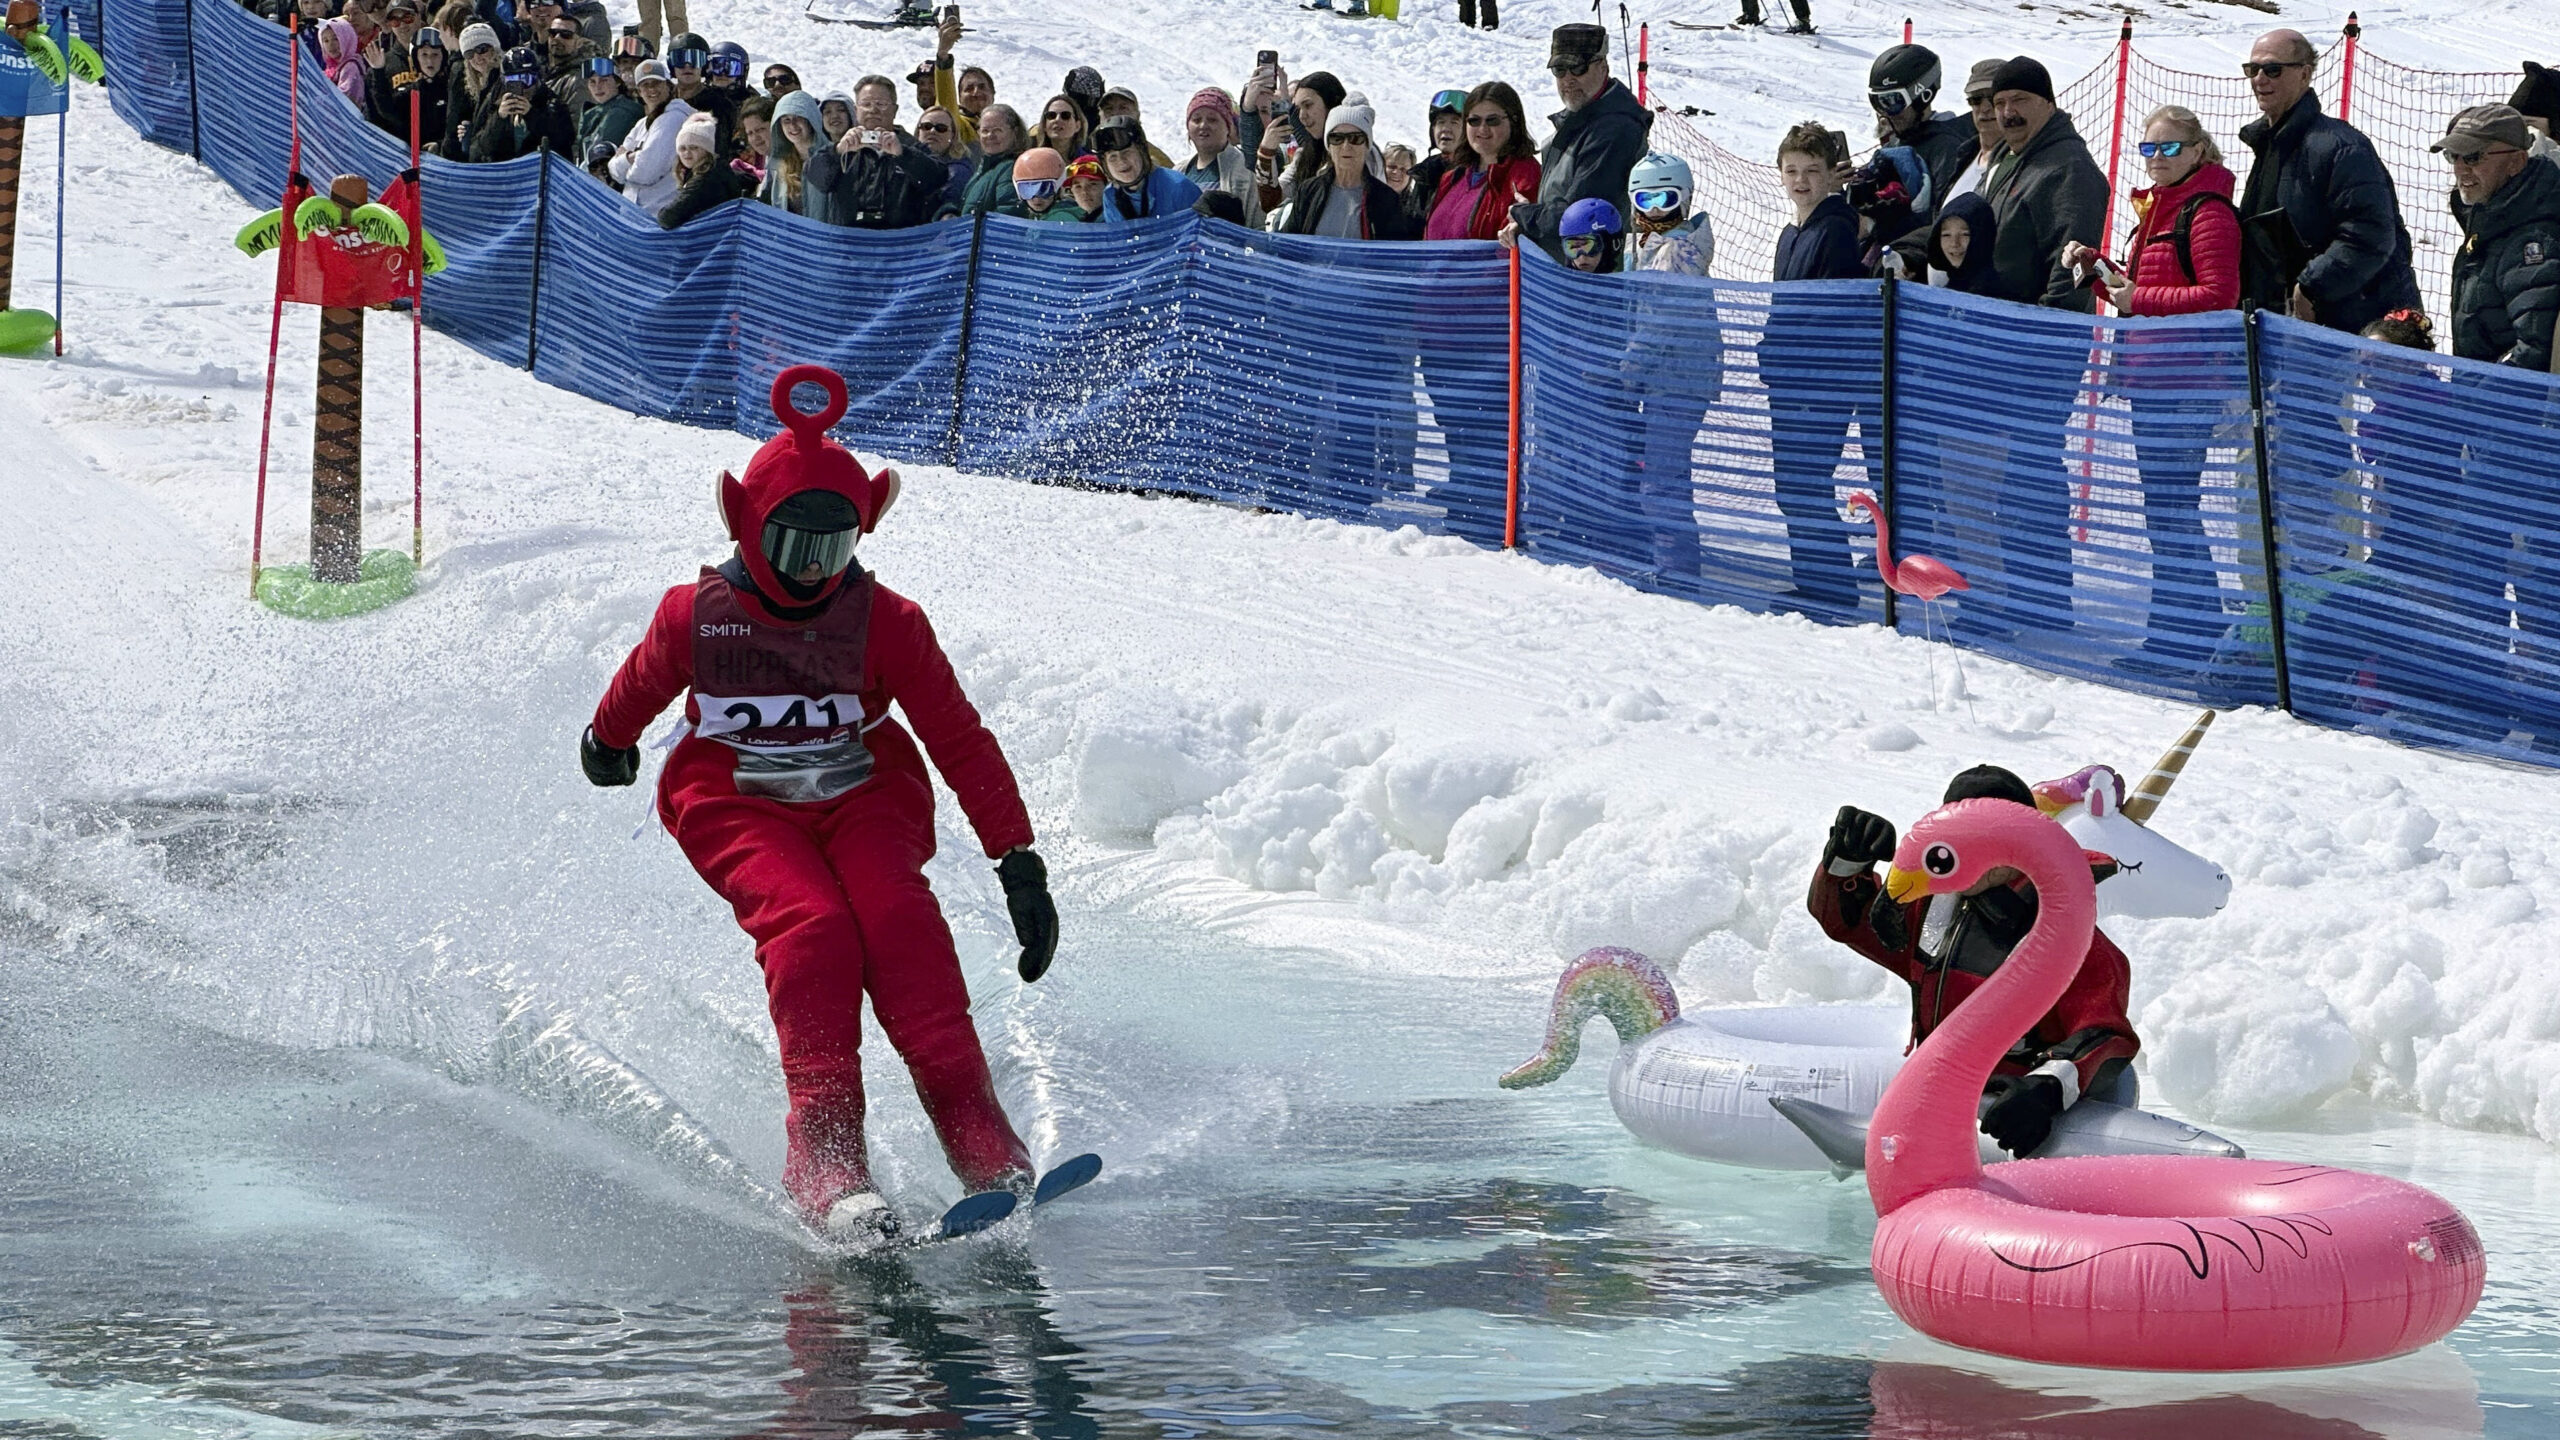 A skier dressed as a Teletubbie participates in a pond skimming event at Gunstock Mountain Resort....